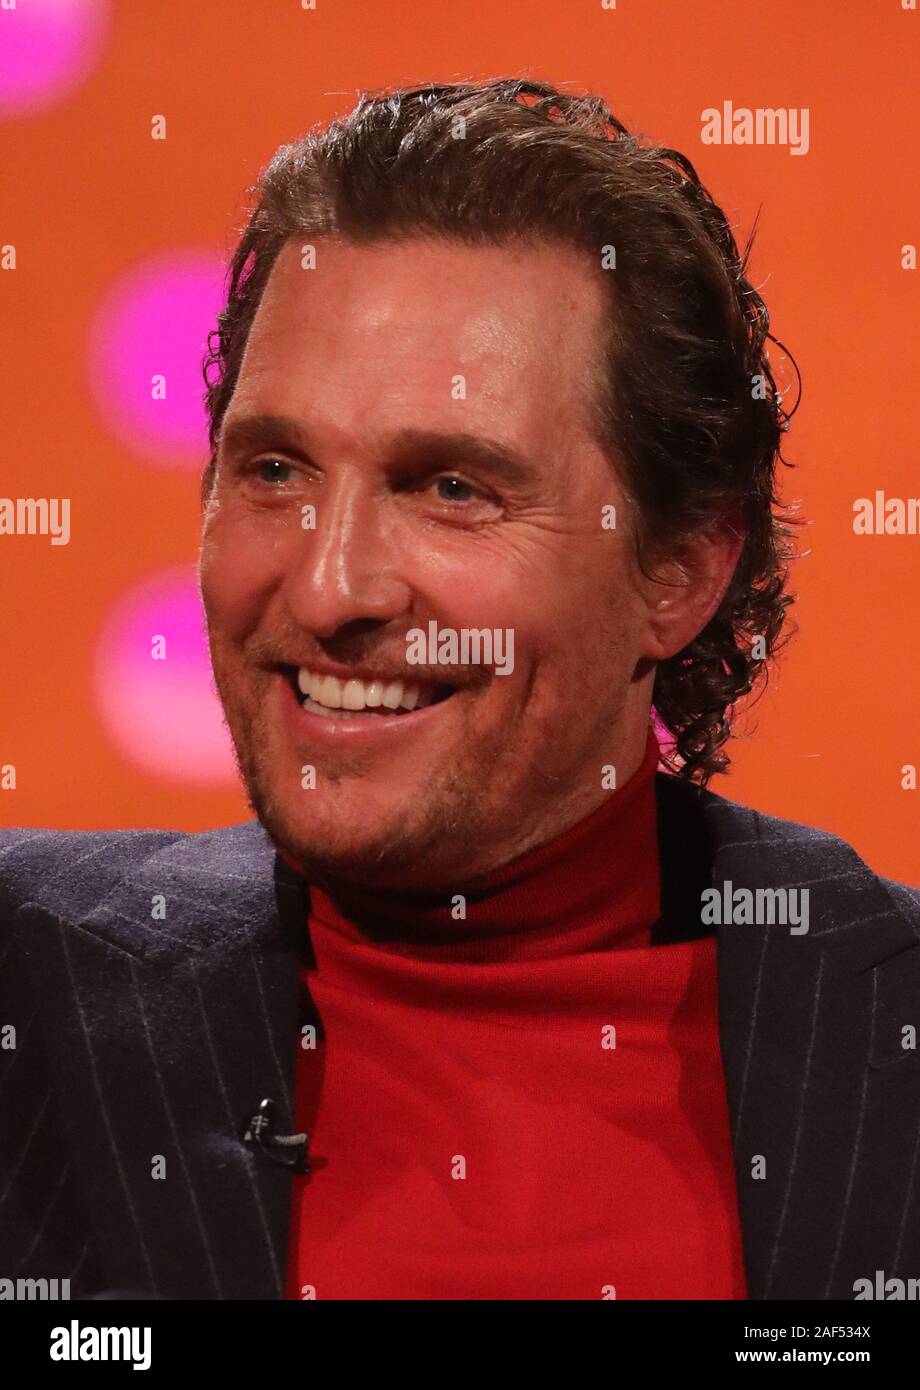 Matthew McConaughey during the filming for the Graham Norton Show at BBC Studioworks 6 Television Centre, Wood Lane, London, to be aired on BBC One on Friday evening. Stock Photo